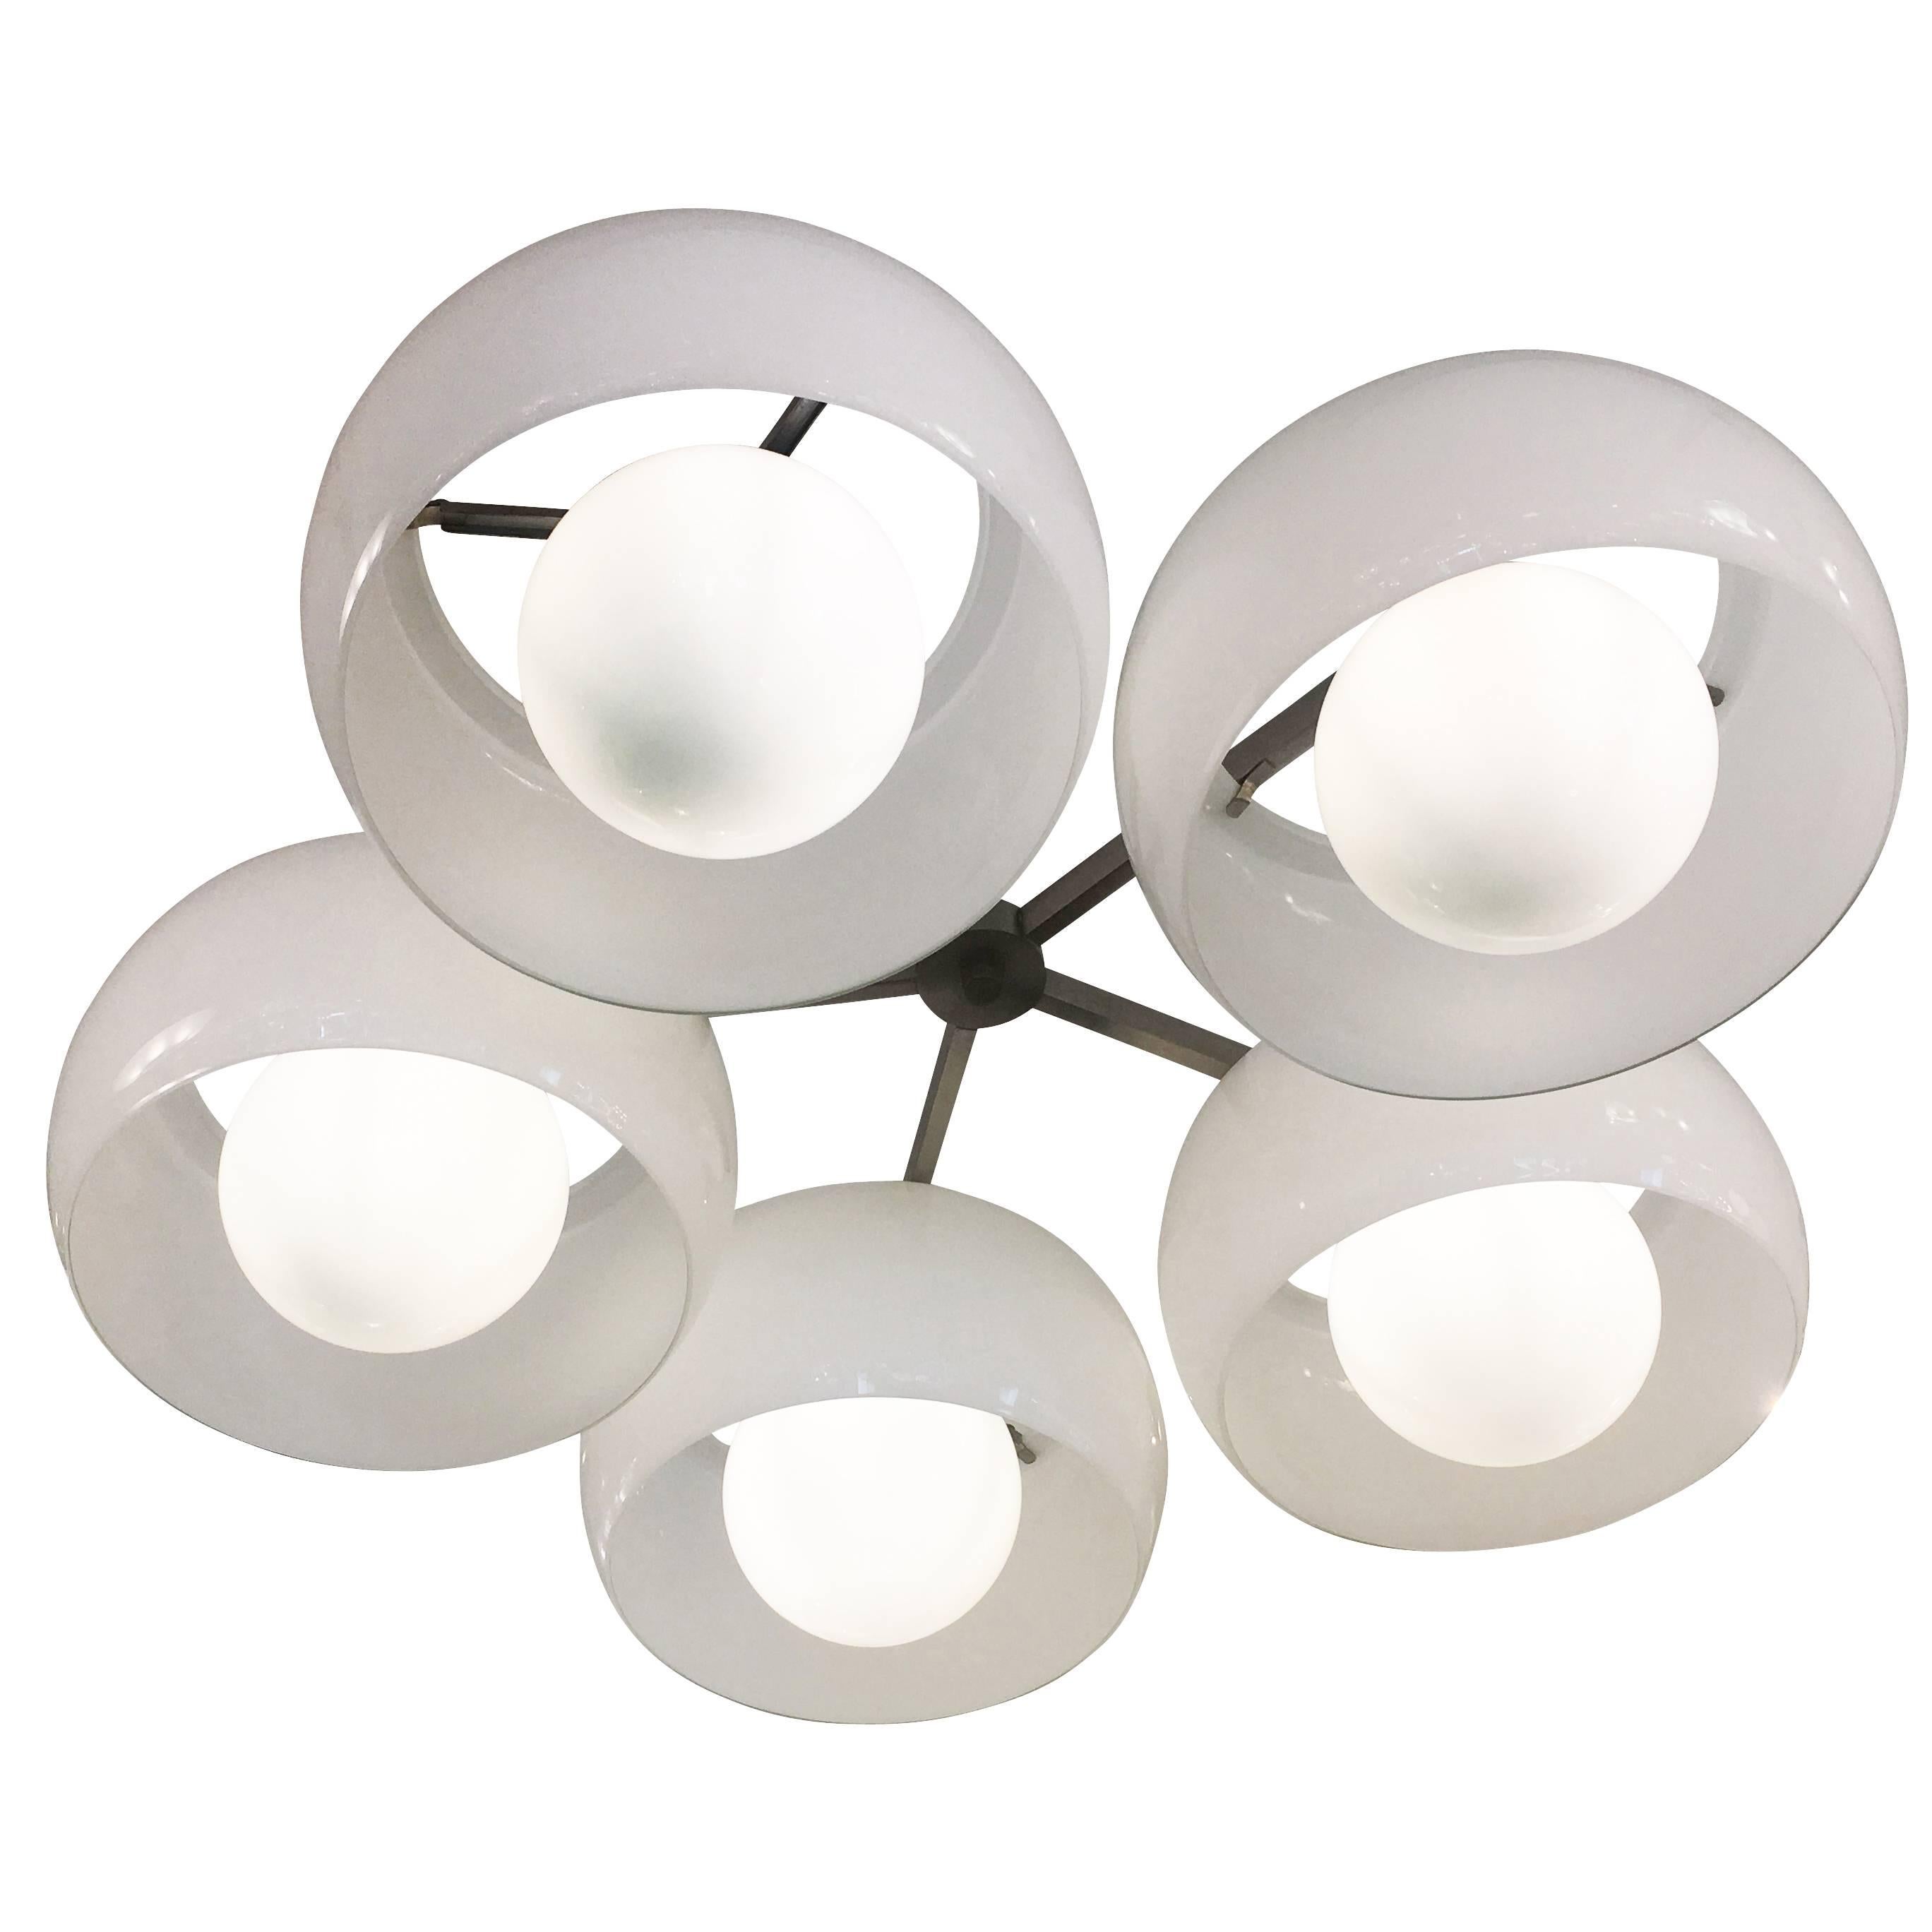 Mid-Century Modern Triclinio Ceiling Light by Magistretti for Artemide